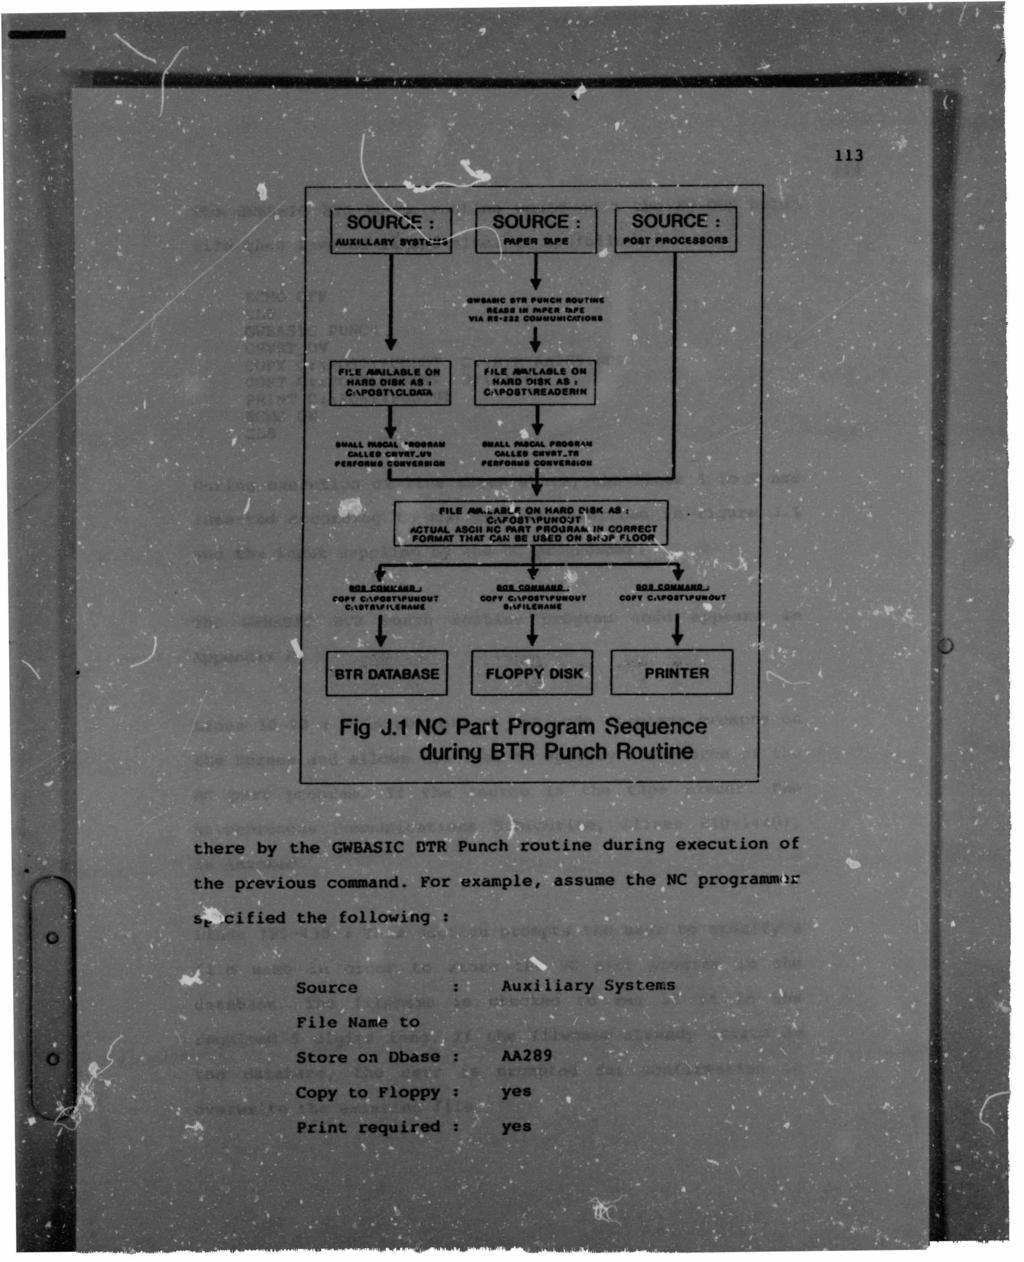 SOURCE mpbr»pe SOURCE : POST PROCESSORS FILE ON HARO CISK AS : C :\F O S l\p U N O J T ACTUAL ASCII NC M R T PROORAIk IN CORRECT FORMAT THAT CAN BE USED ON SHOP FLOOR FLOPPY DISK PRINTER Fig J.